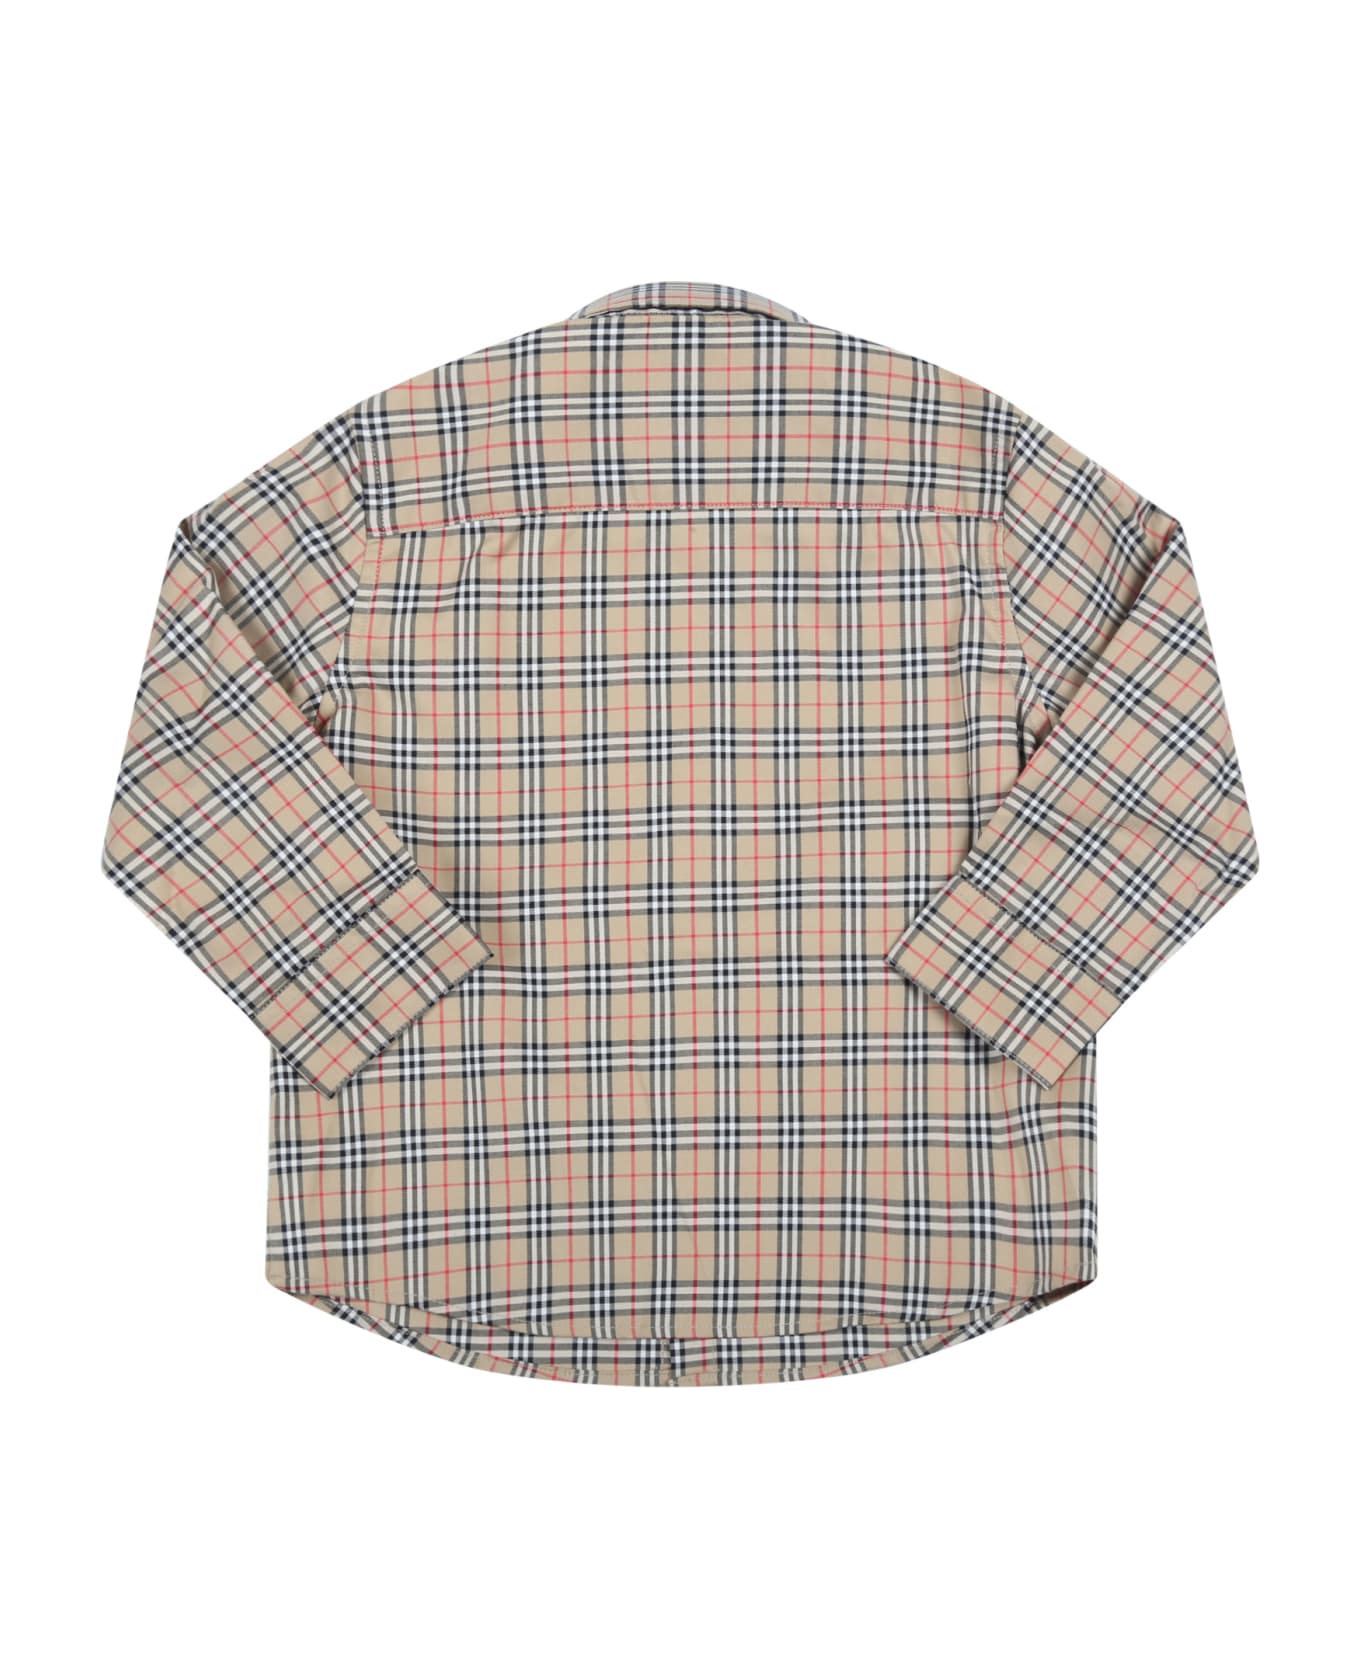 Burberry Beige Shirt For Baby Boy With Vintage Checks - Beige